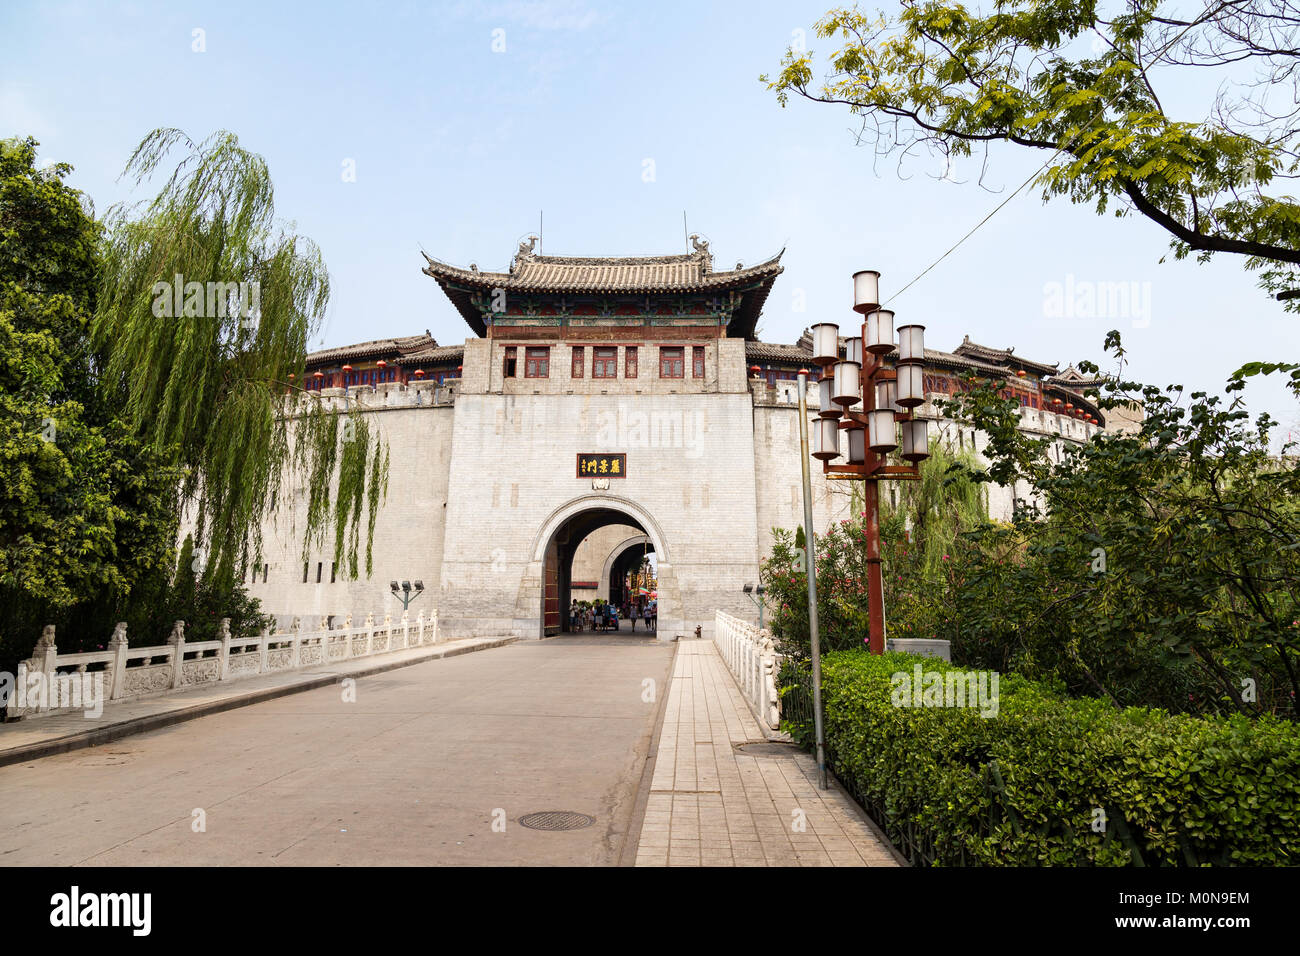 Lijing gate is the fortified entrance to the old city of Luoyang, henan, China Stock Photo